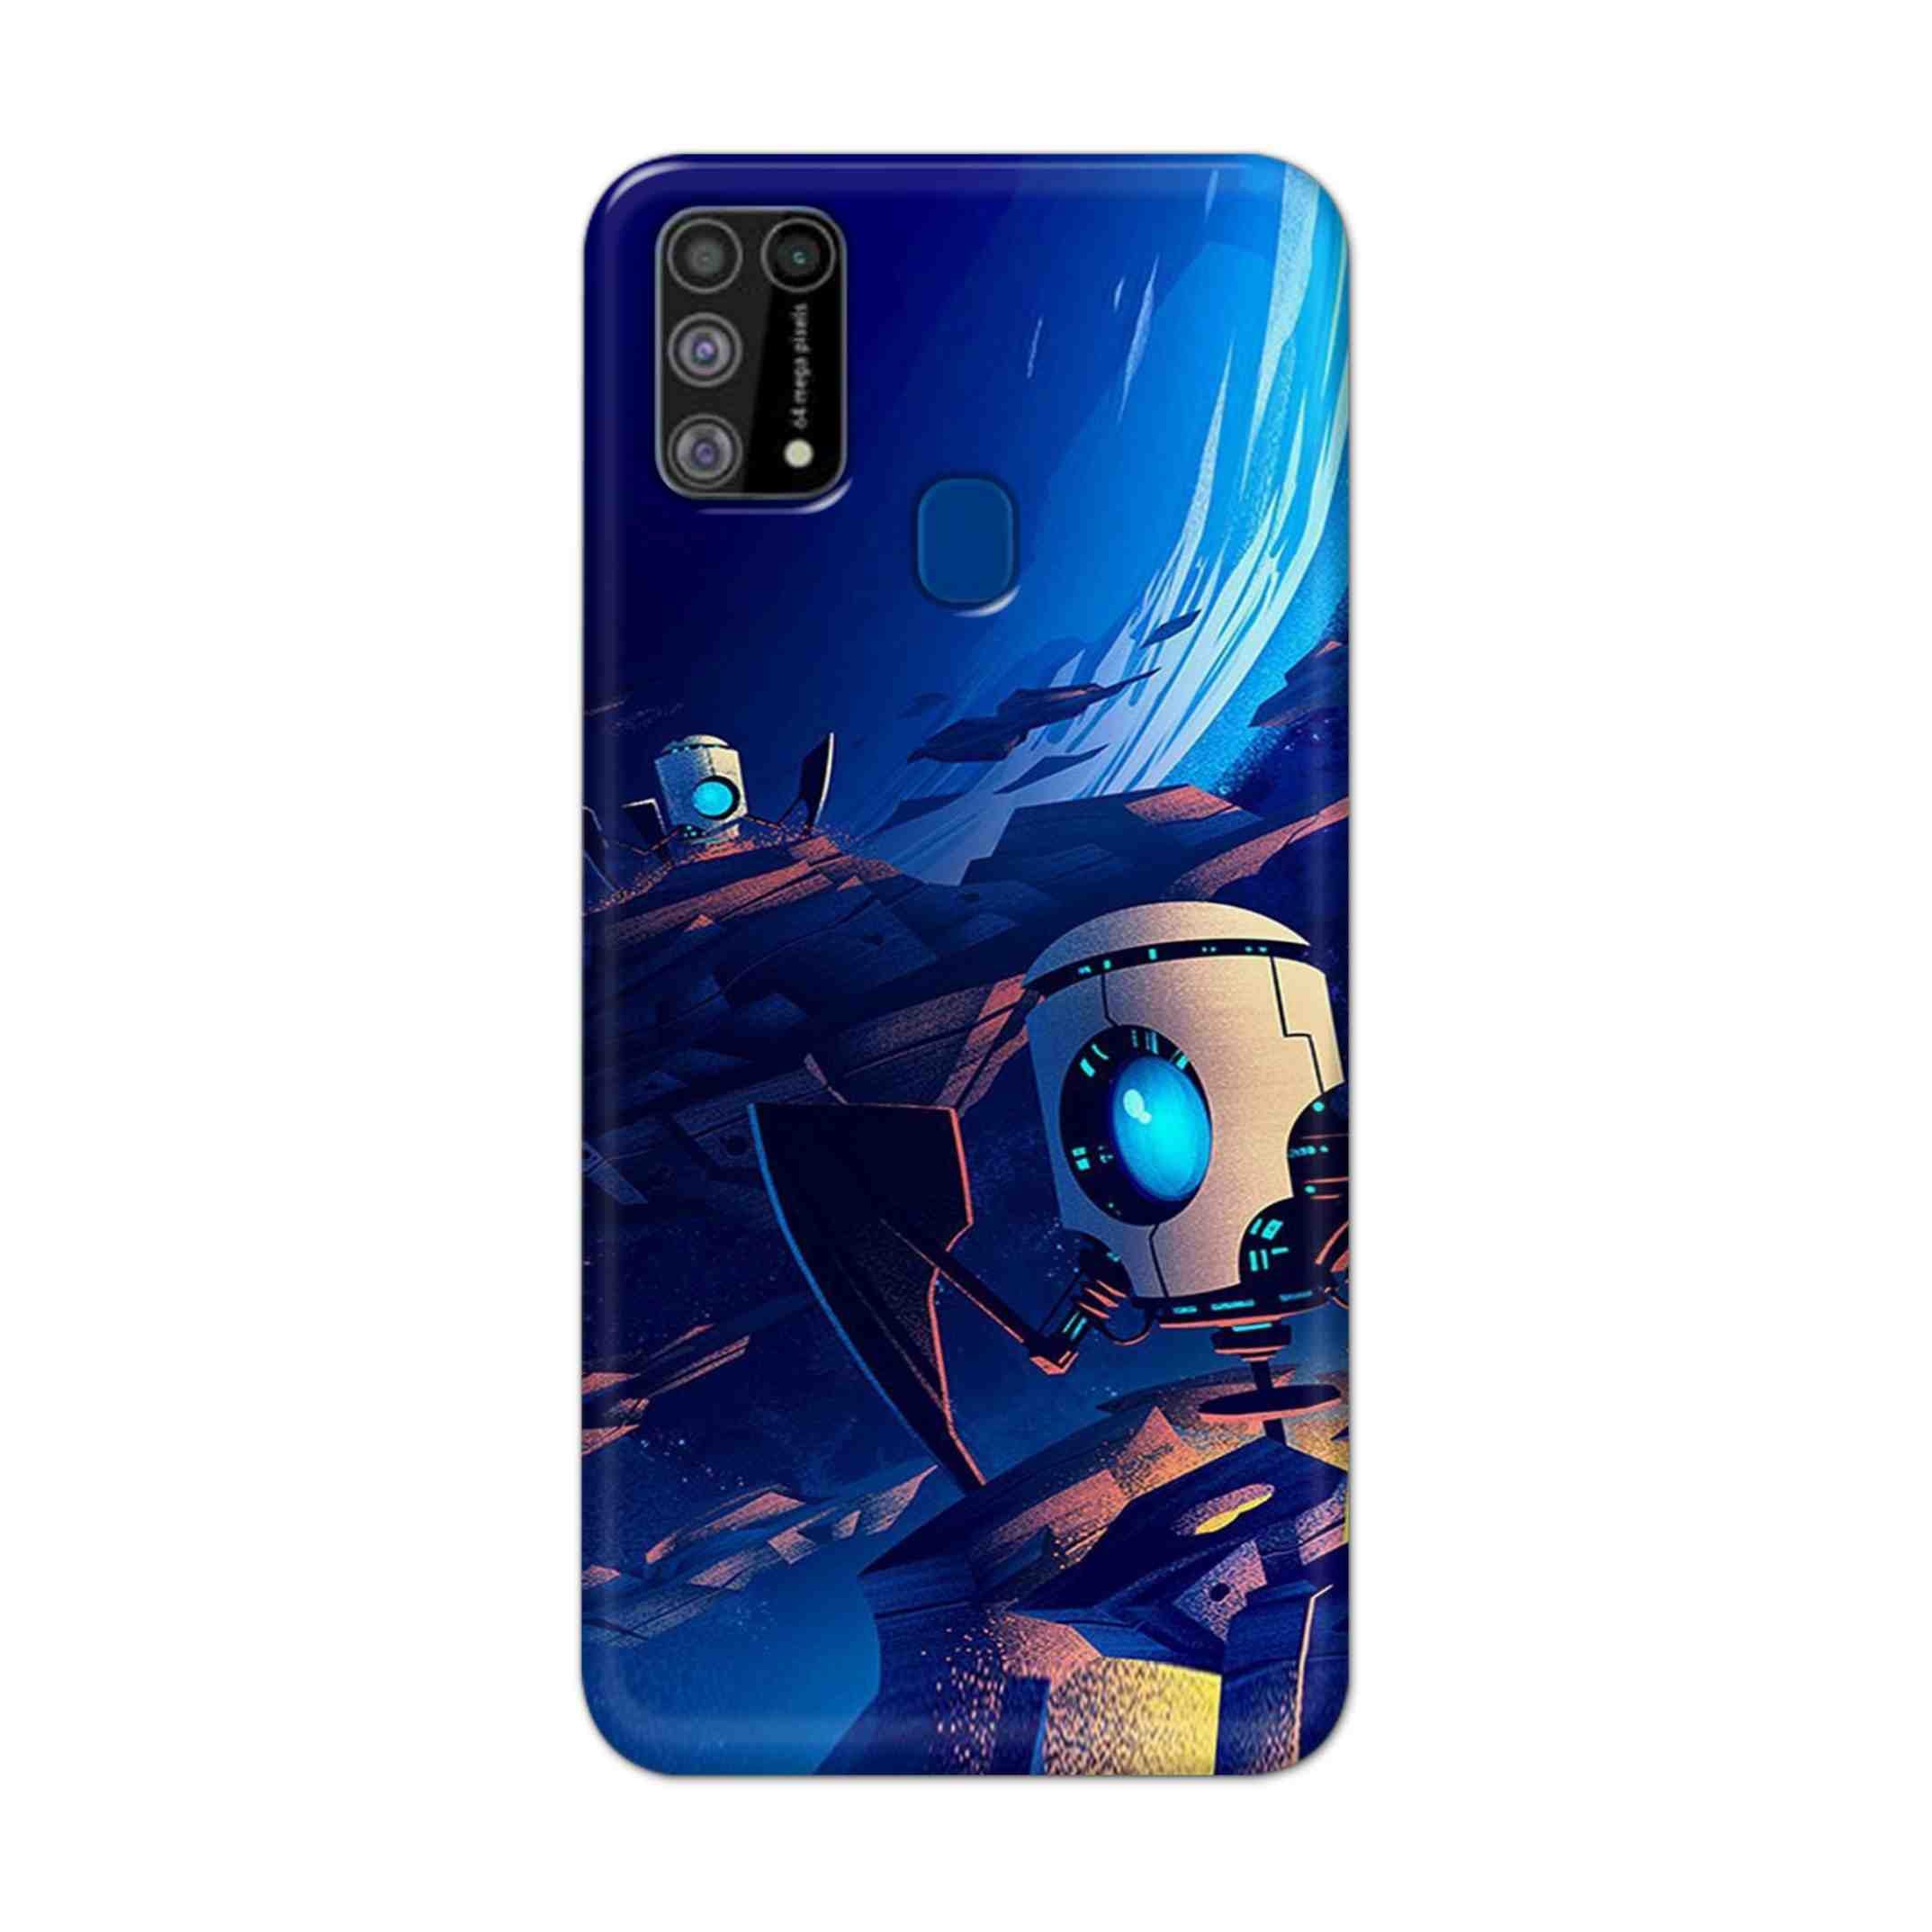 Buy Spaceship Robot Hard Back Mobile Phone Case Cover For Samsung Galaxy M31 Online